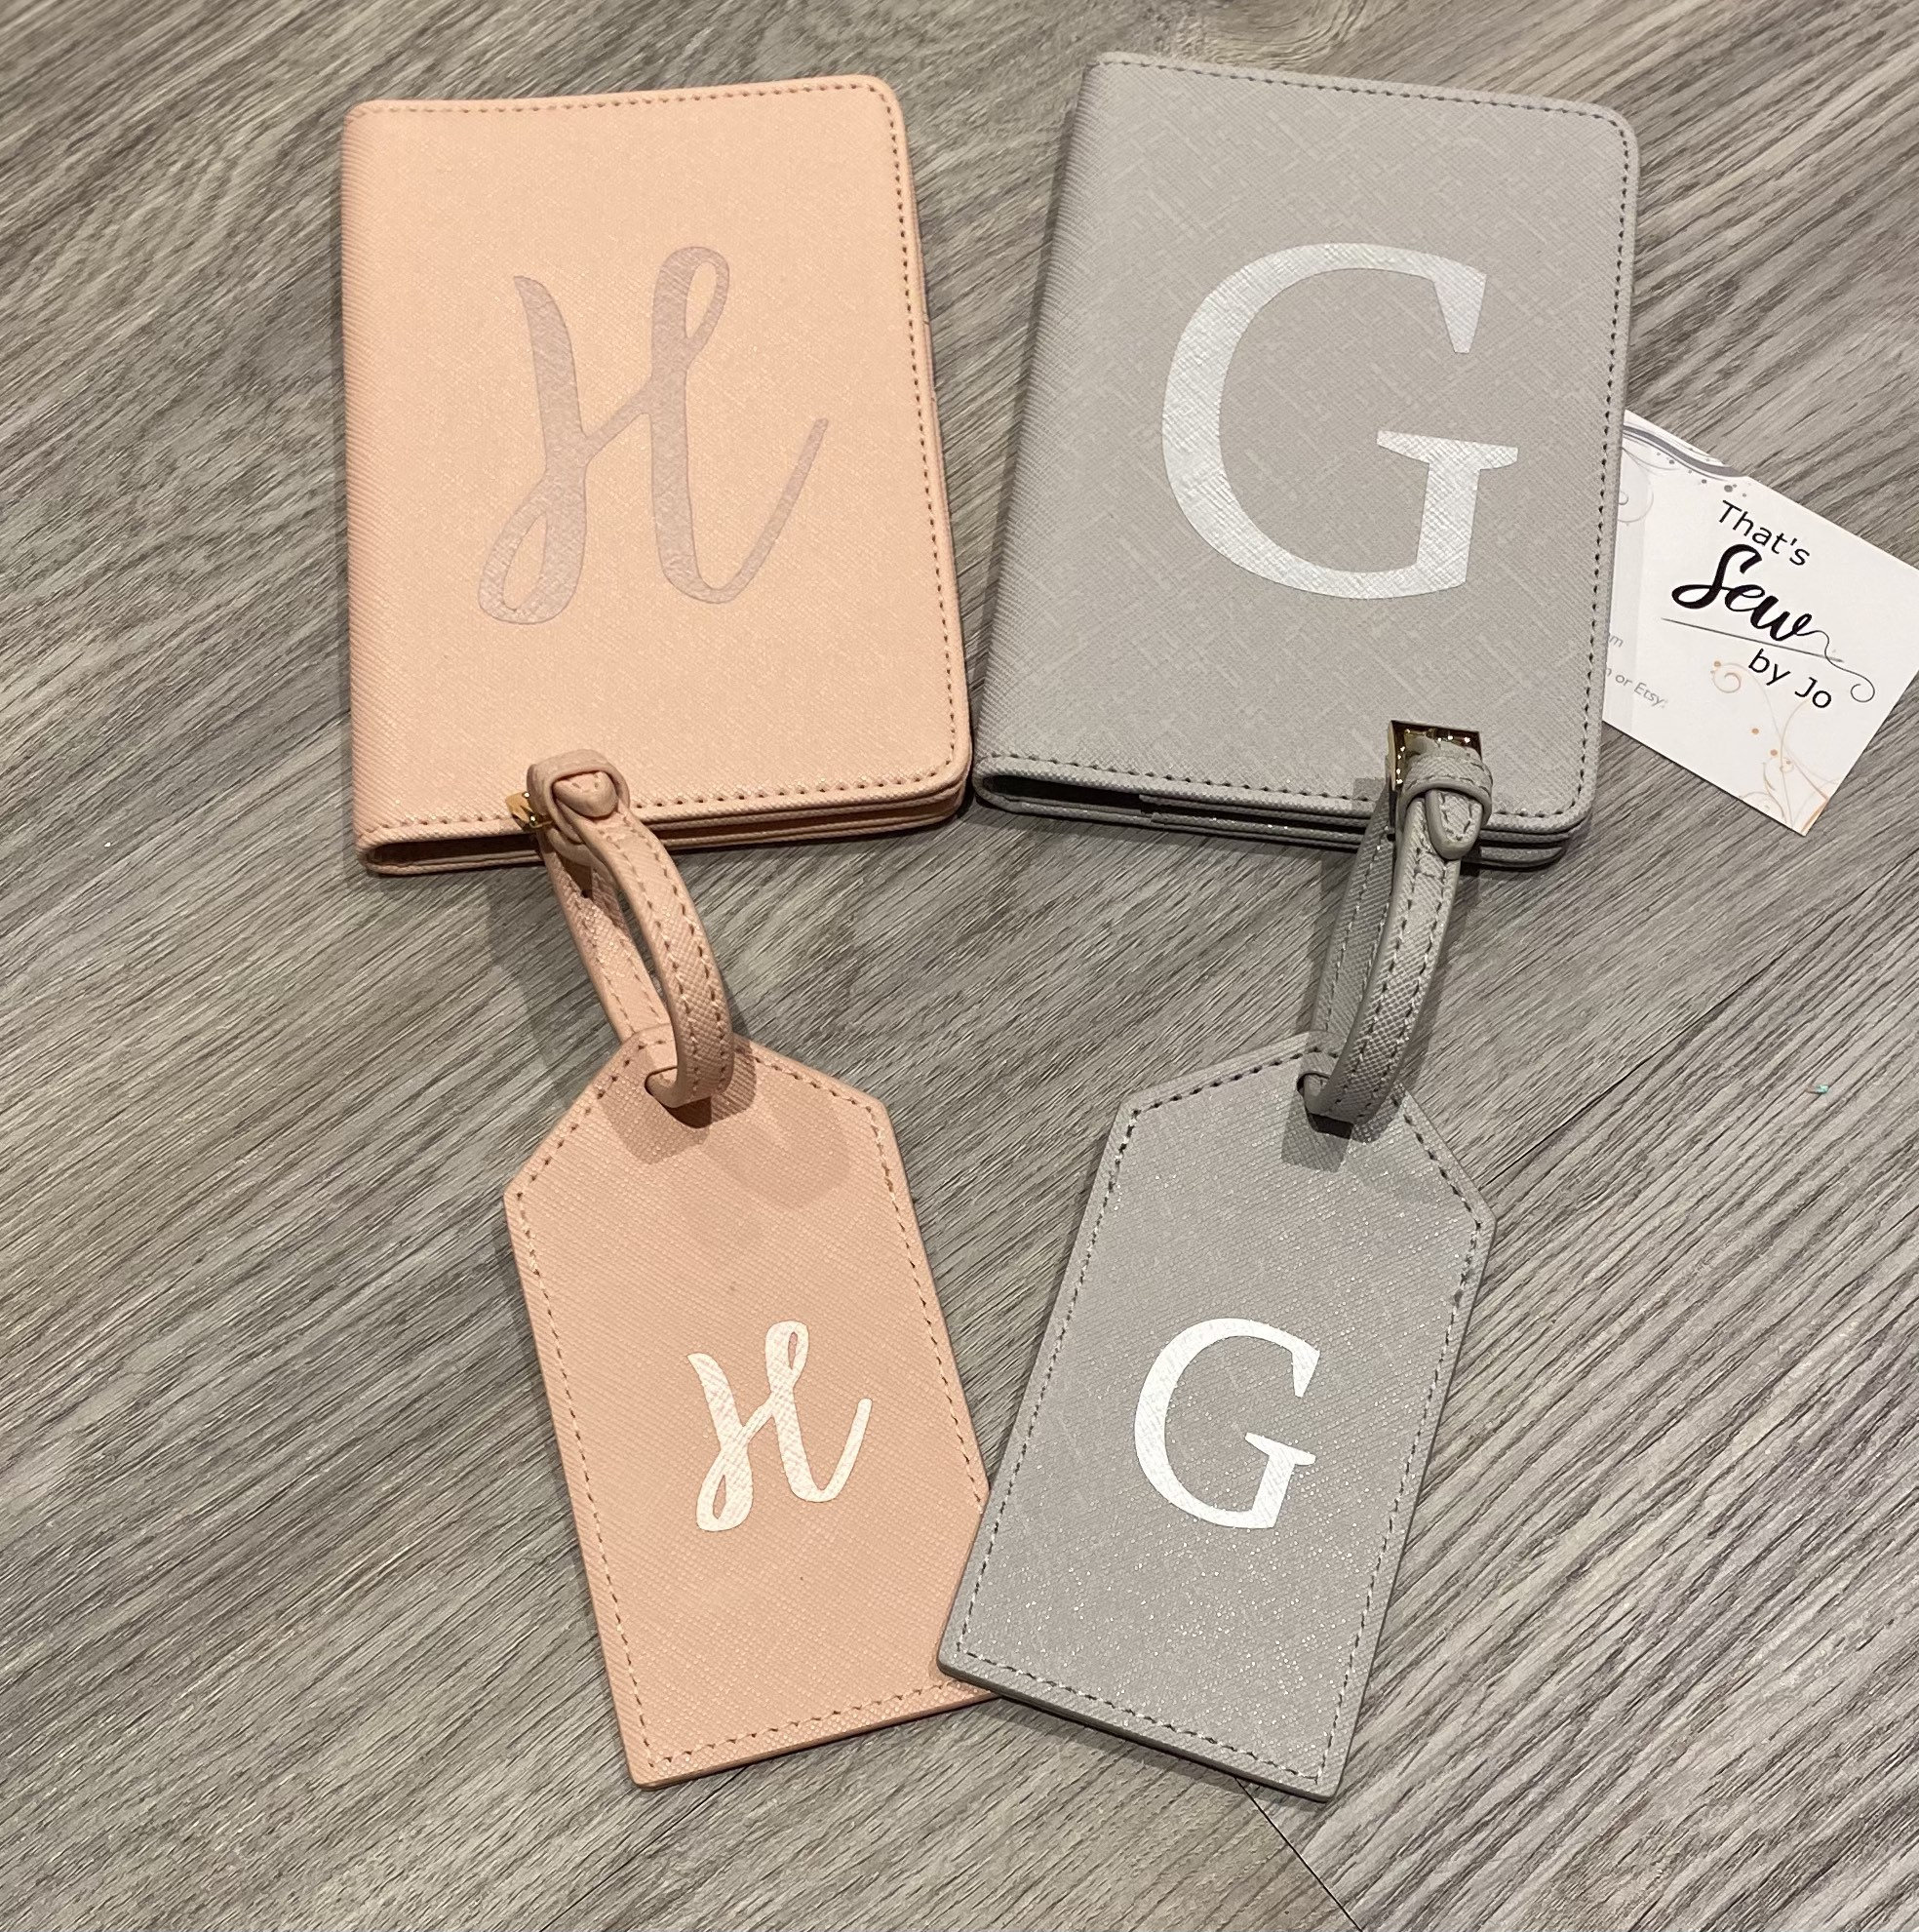 silkmilk Custom Luggage Tag Personalized Your Own Text, Customized Travel  Suitcases Labels Tags with…See more silkmilk Custom Luggage Tag  Personalized